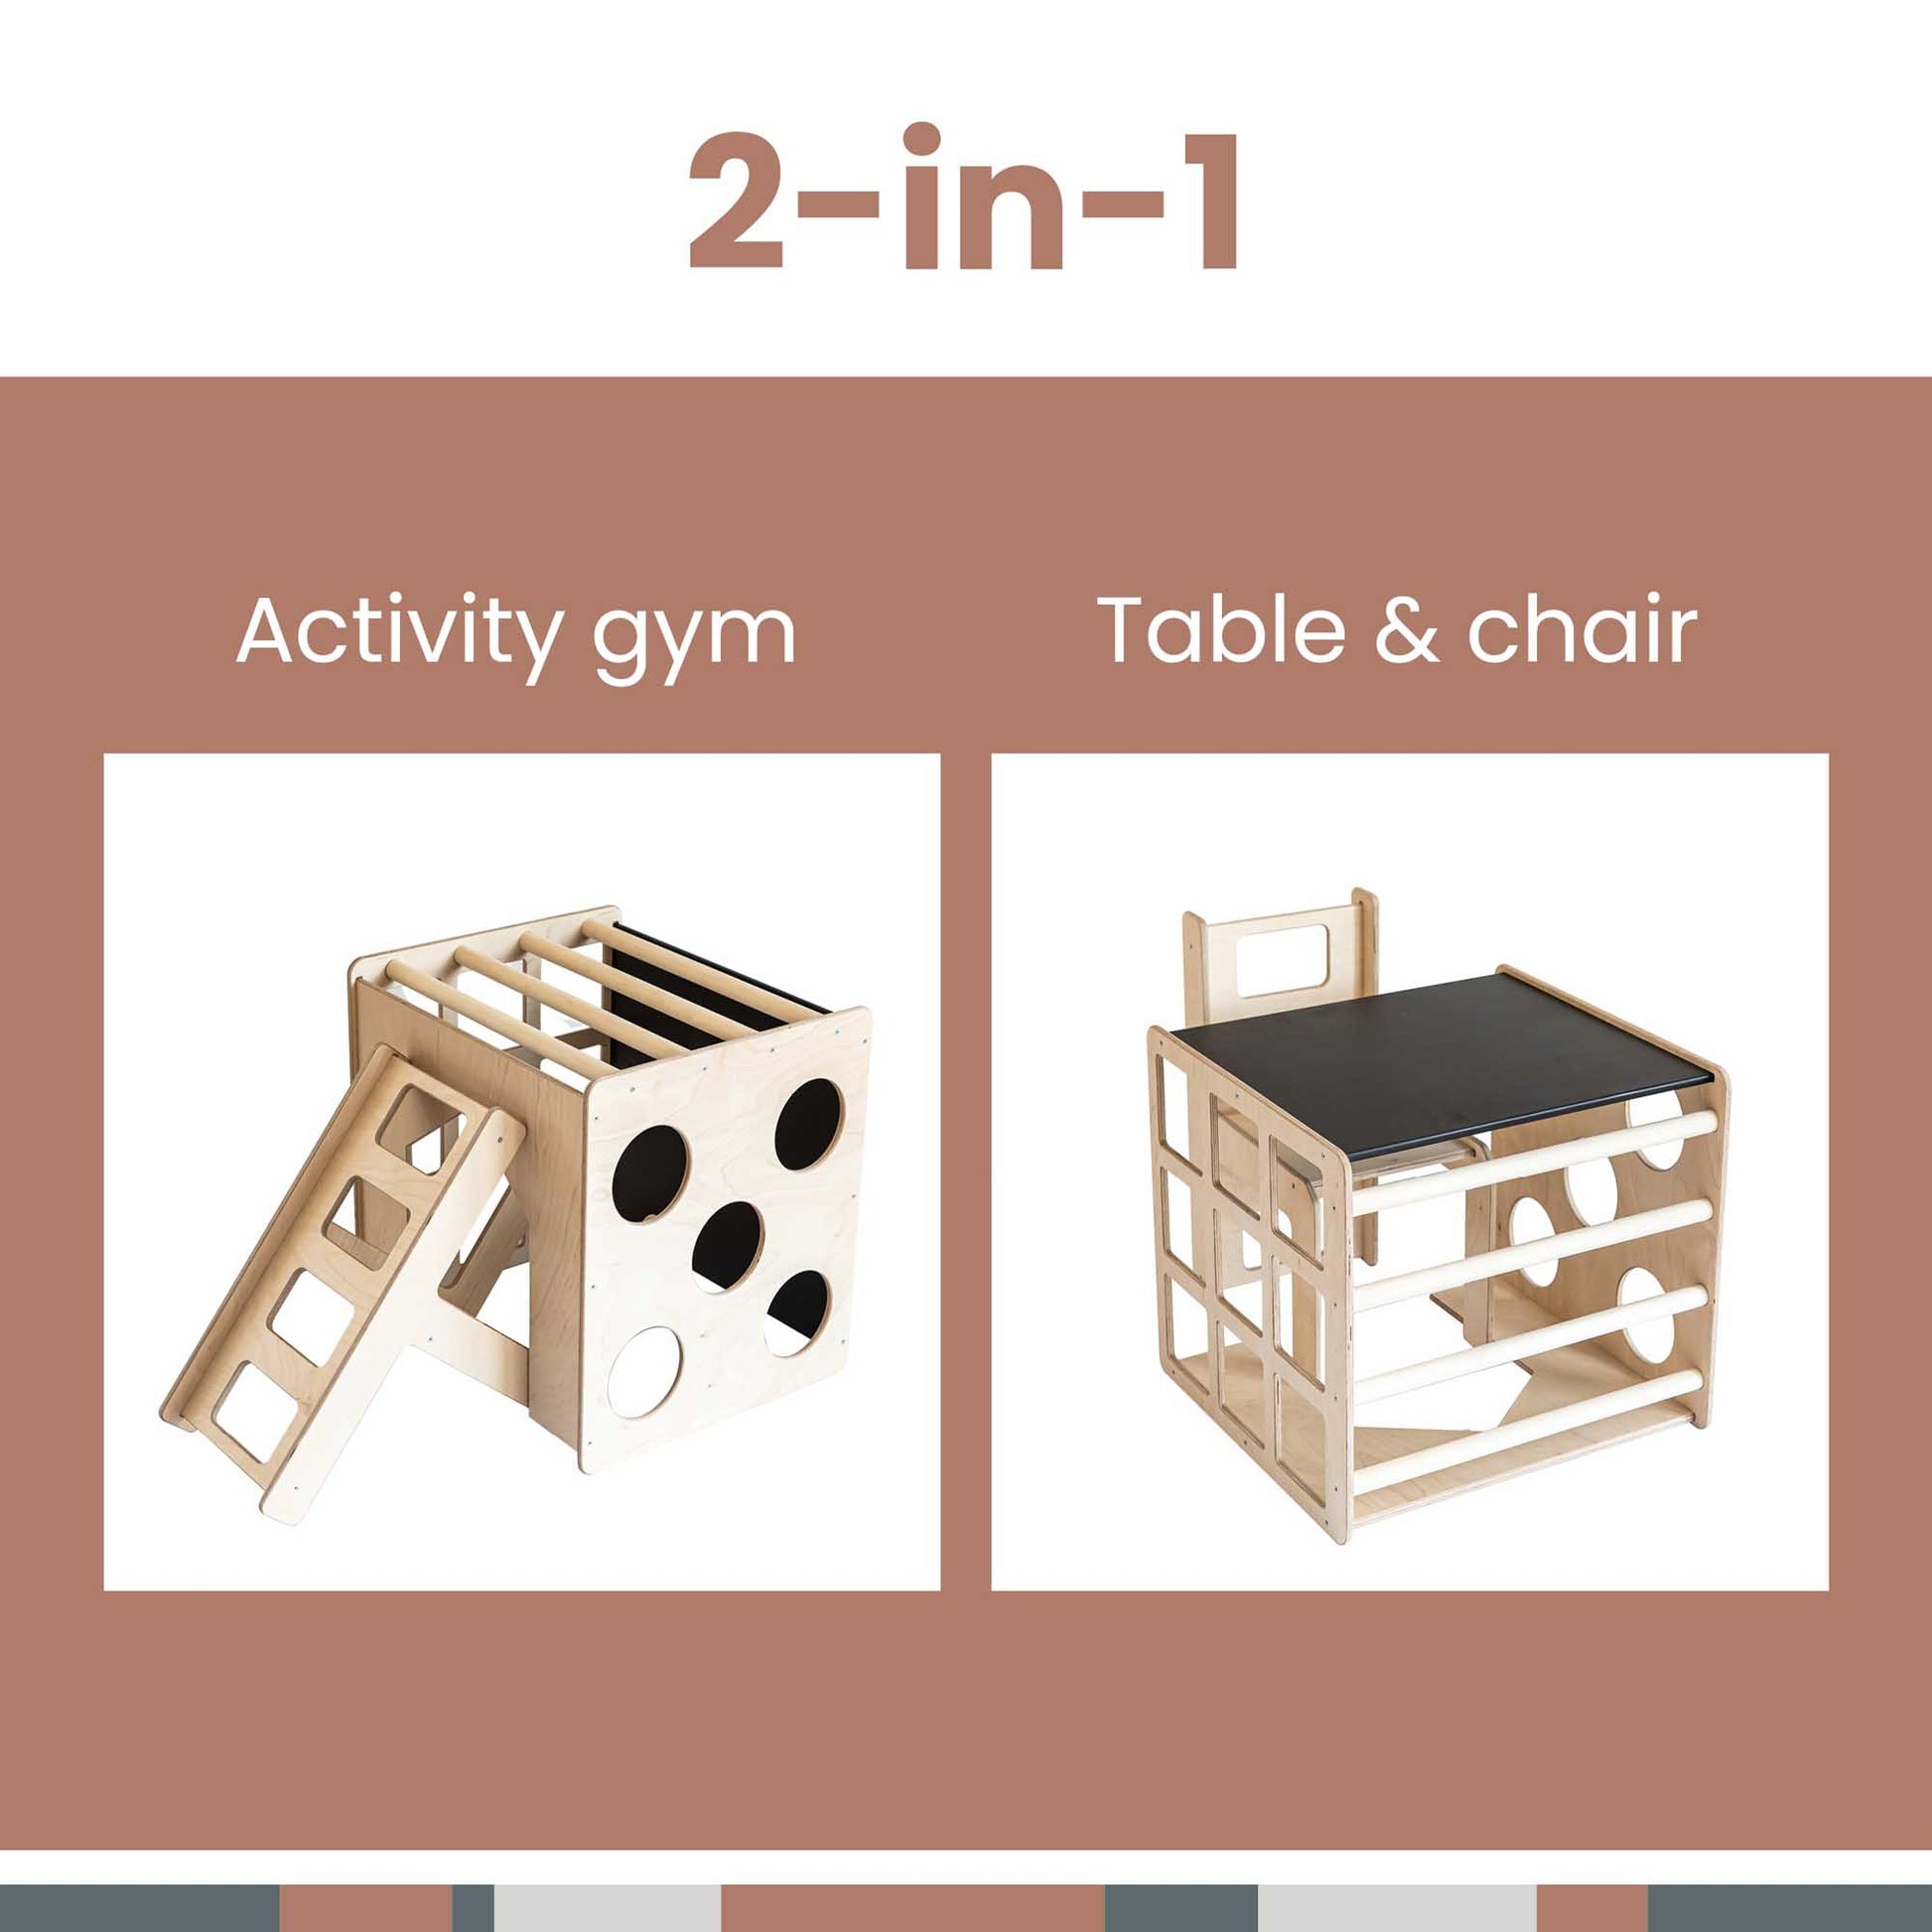 This climbing triangle + 2-in-1 climbing cube / table and chair + a ramp provides a versatile play experience for children, featuring sensory panels and a climber.